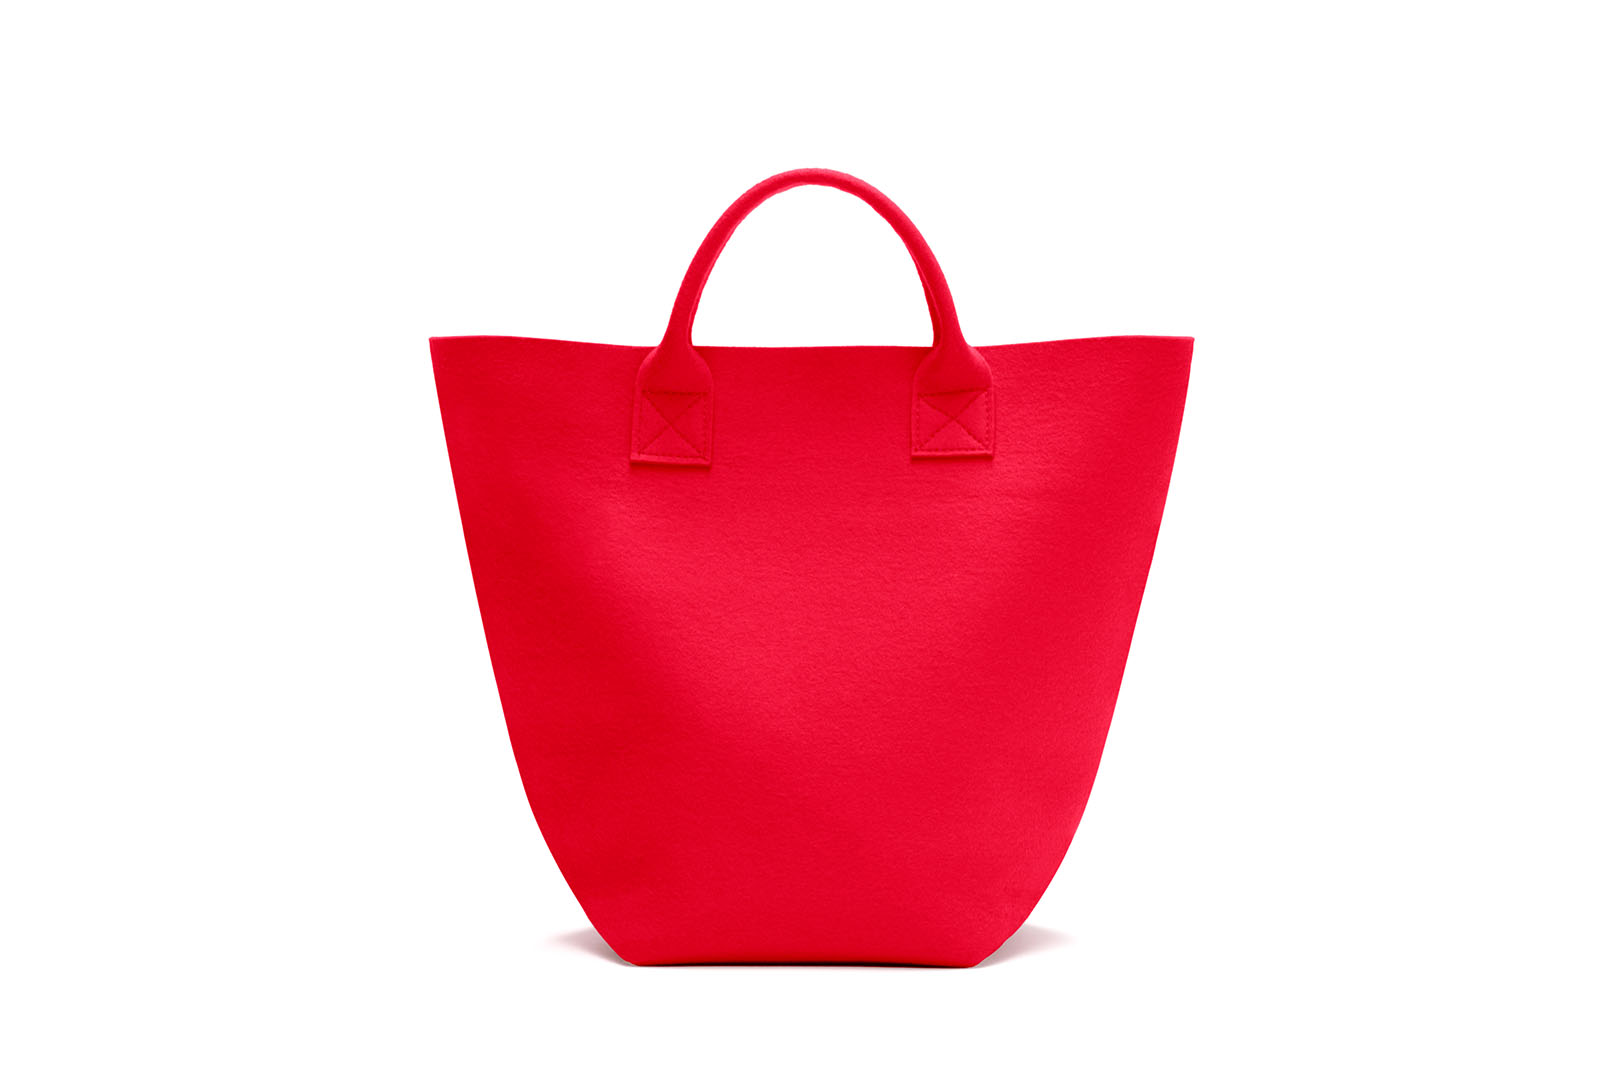 HEY-Sign Filztasche Carry in der Farbe "Coral"